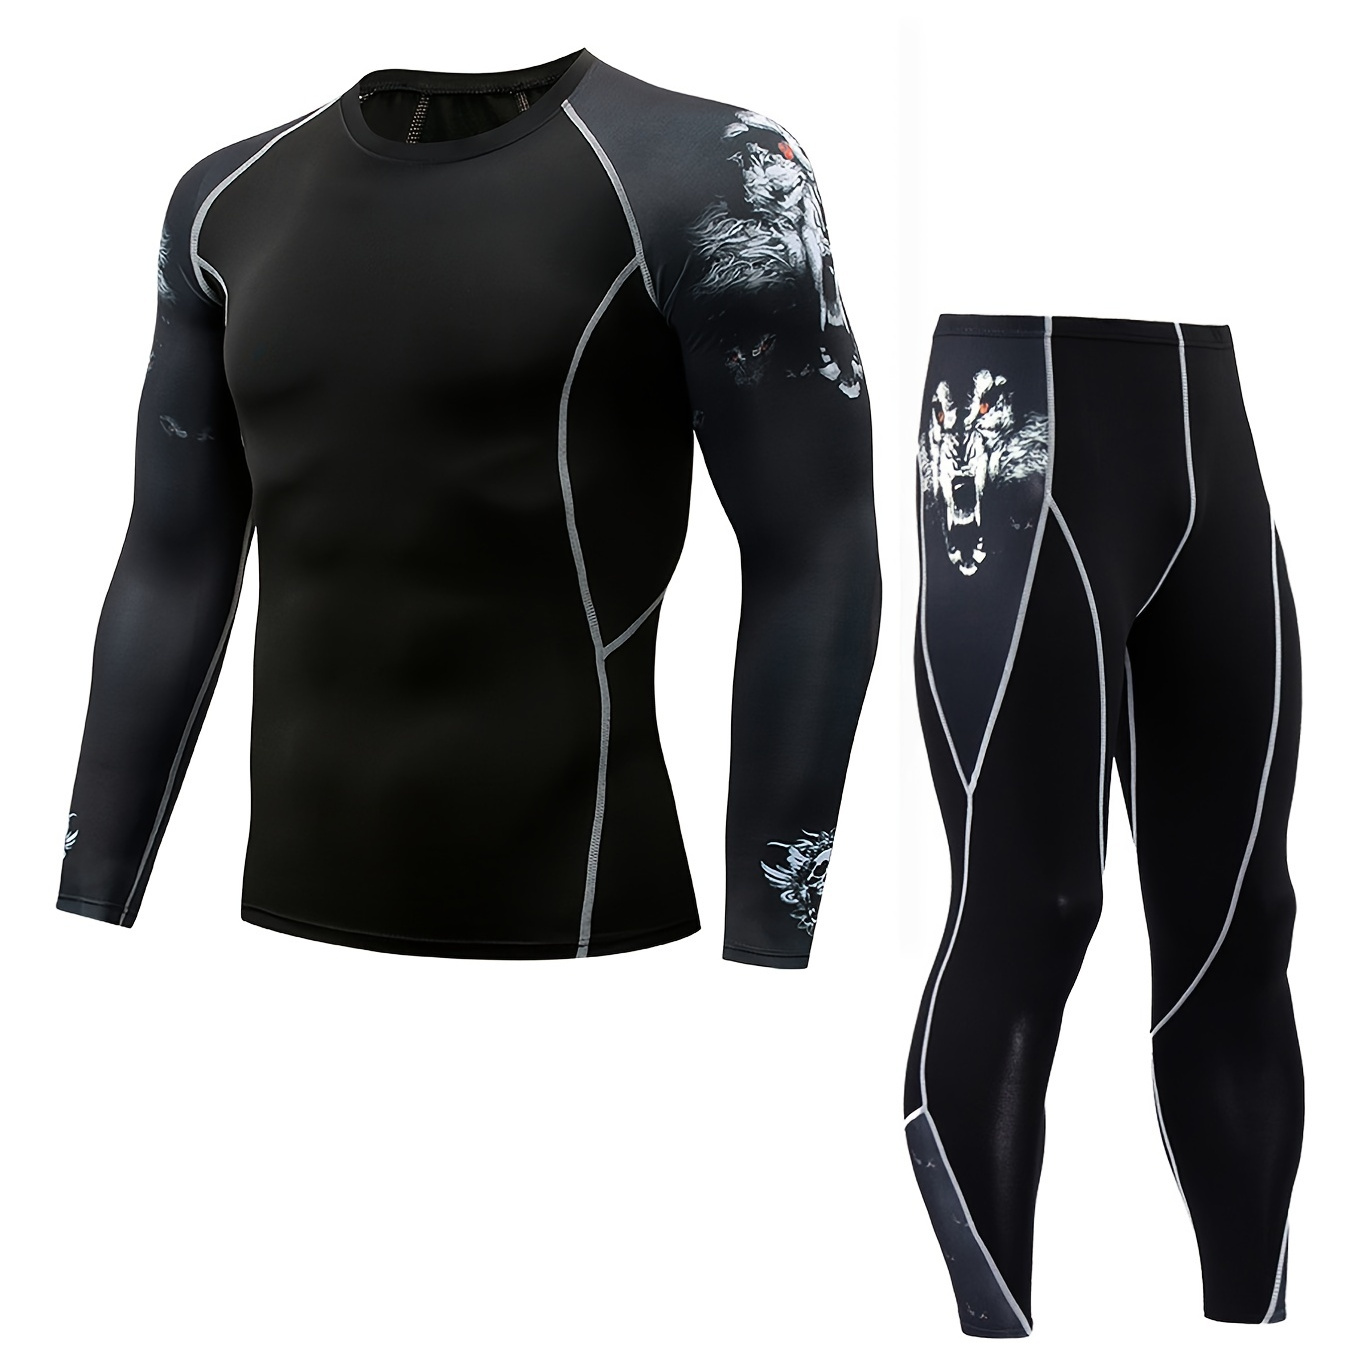 

Men's Thermal Long Sleeves & Pants Set - Slim Fit Compression Bl For Fitness, Running, Cycling, Training & Skiing!